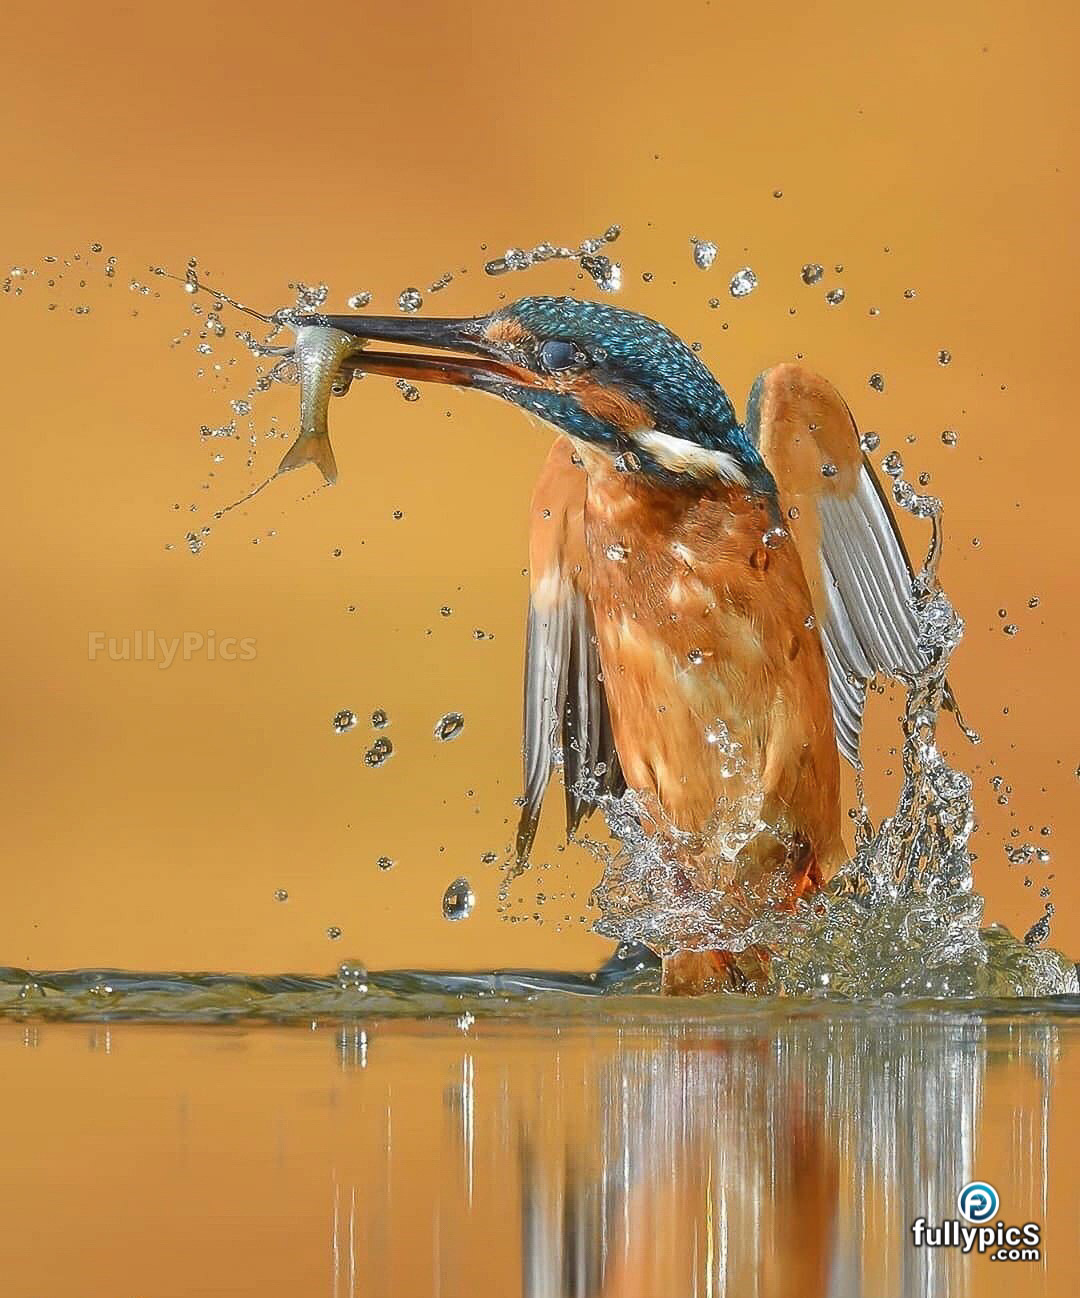 Kingfisher HD Picture Gallery